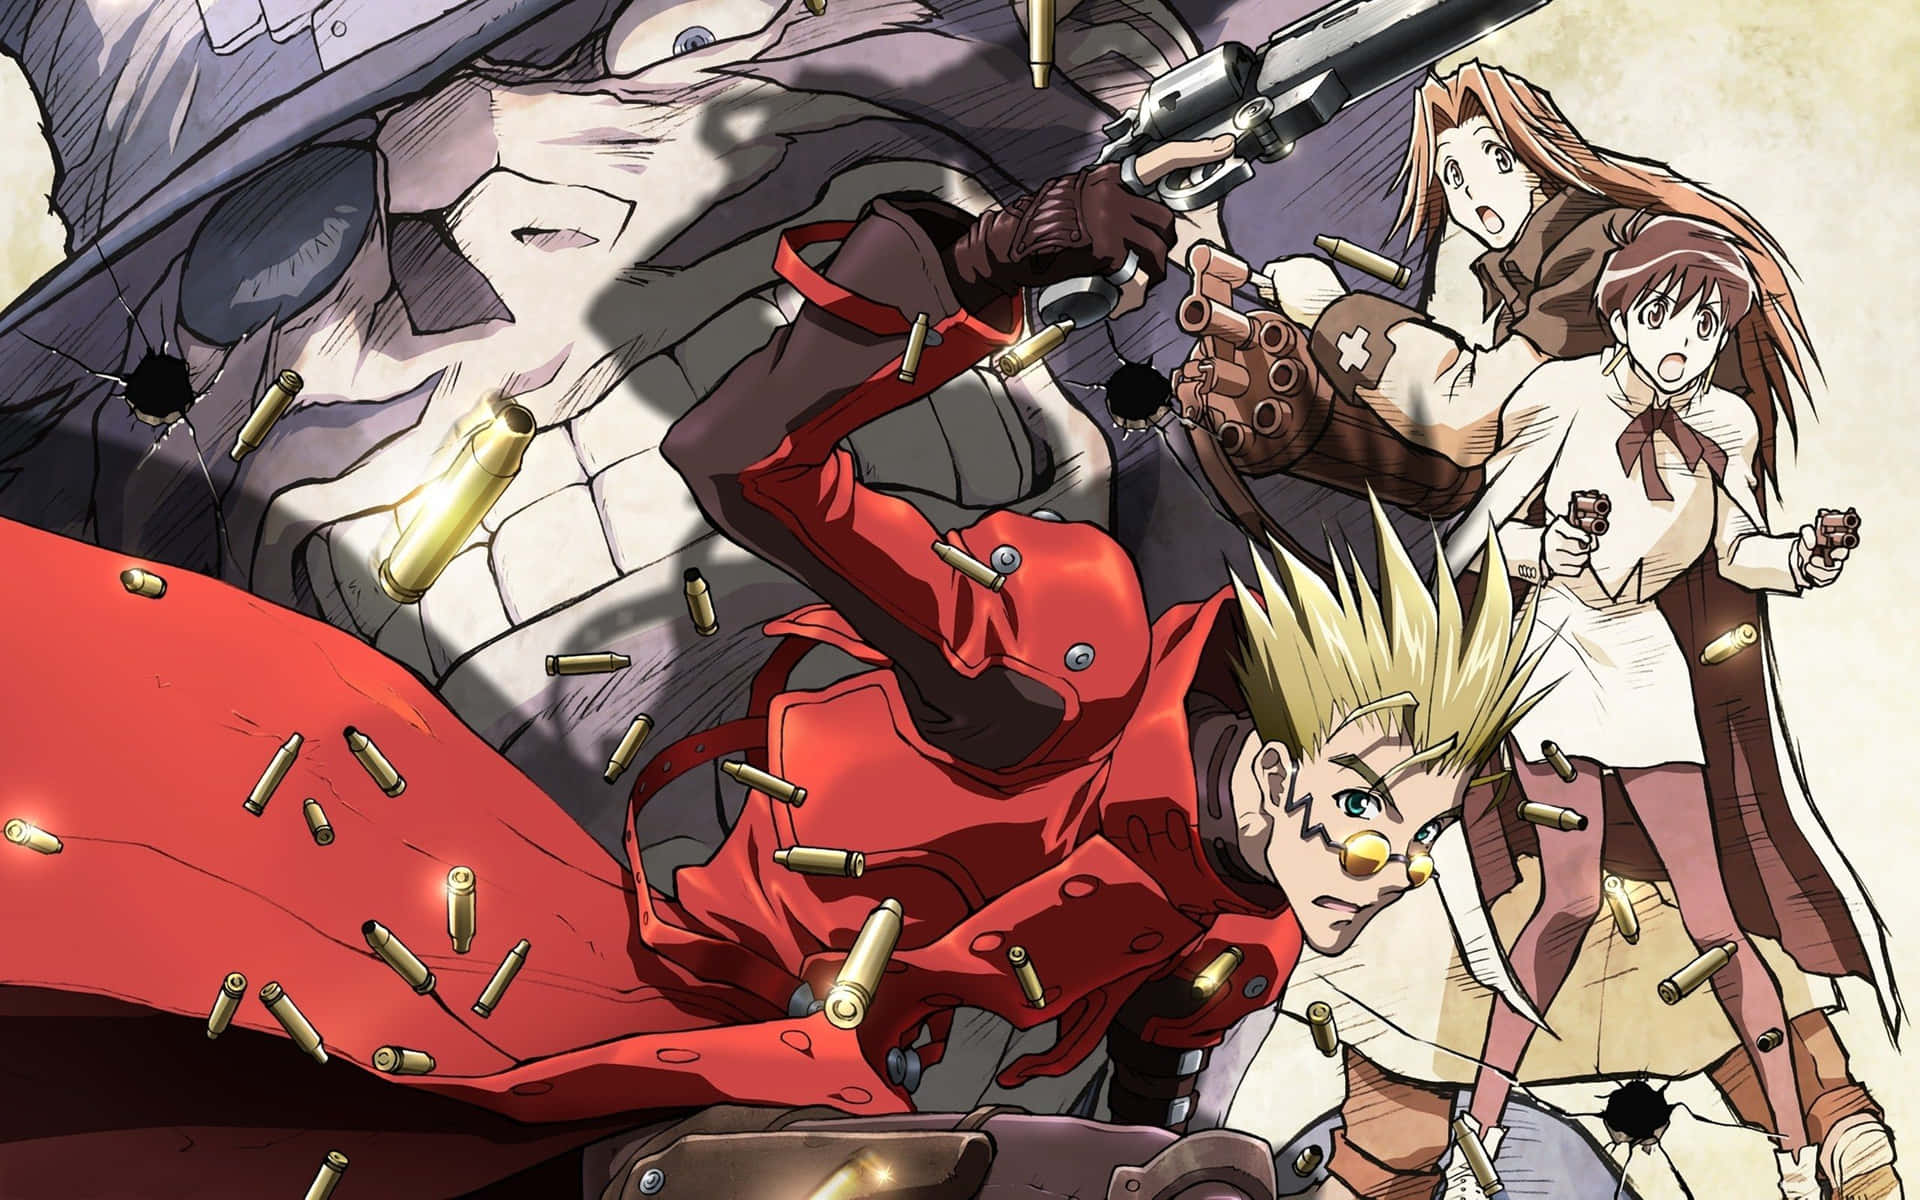 Vash the Stampede from the anime series Trigun